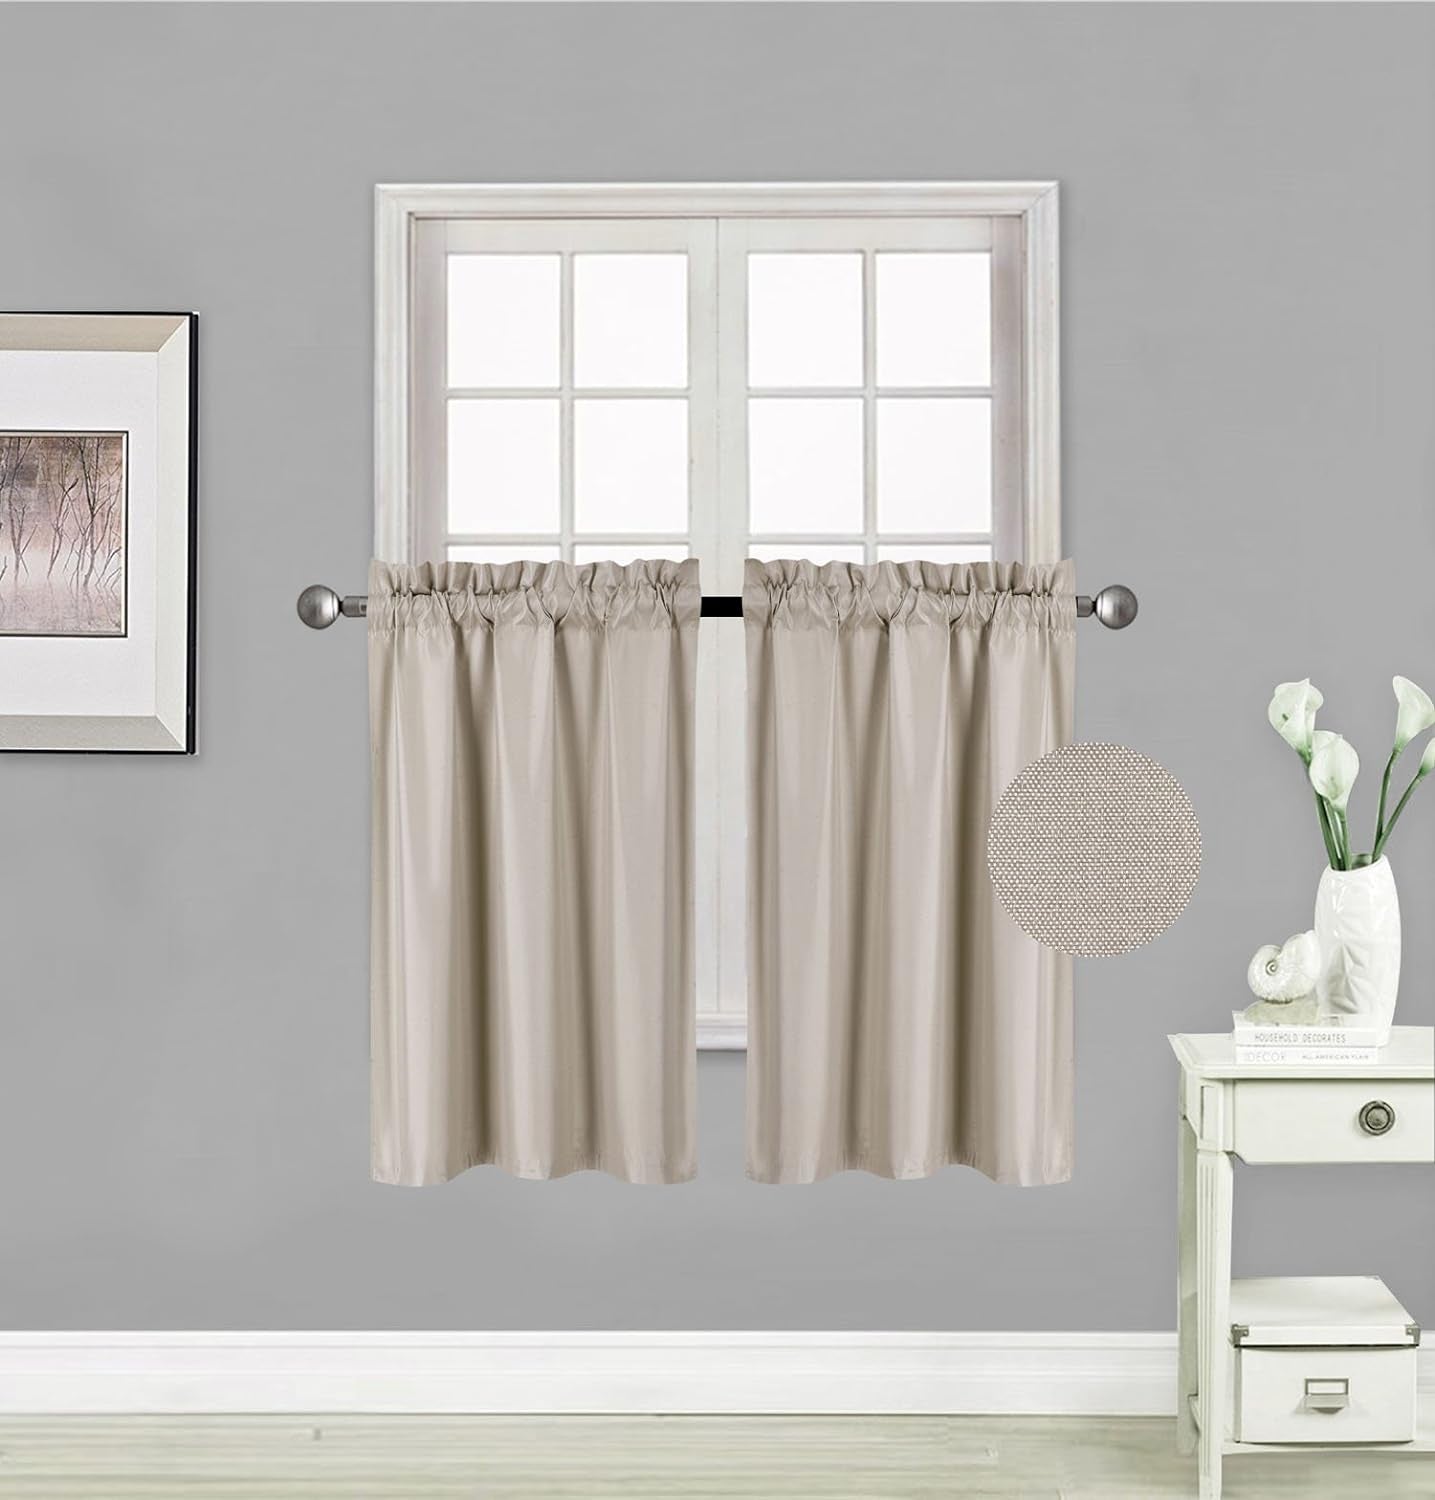 Elegant Home 2 Short Panels Tiers Small Window Treatment Curtain Blackout 28" W X 36" L Each for Kitchen Bathroom # R5  Elegant Home Decor Taupe  